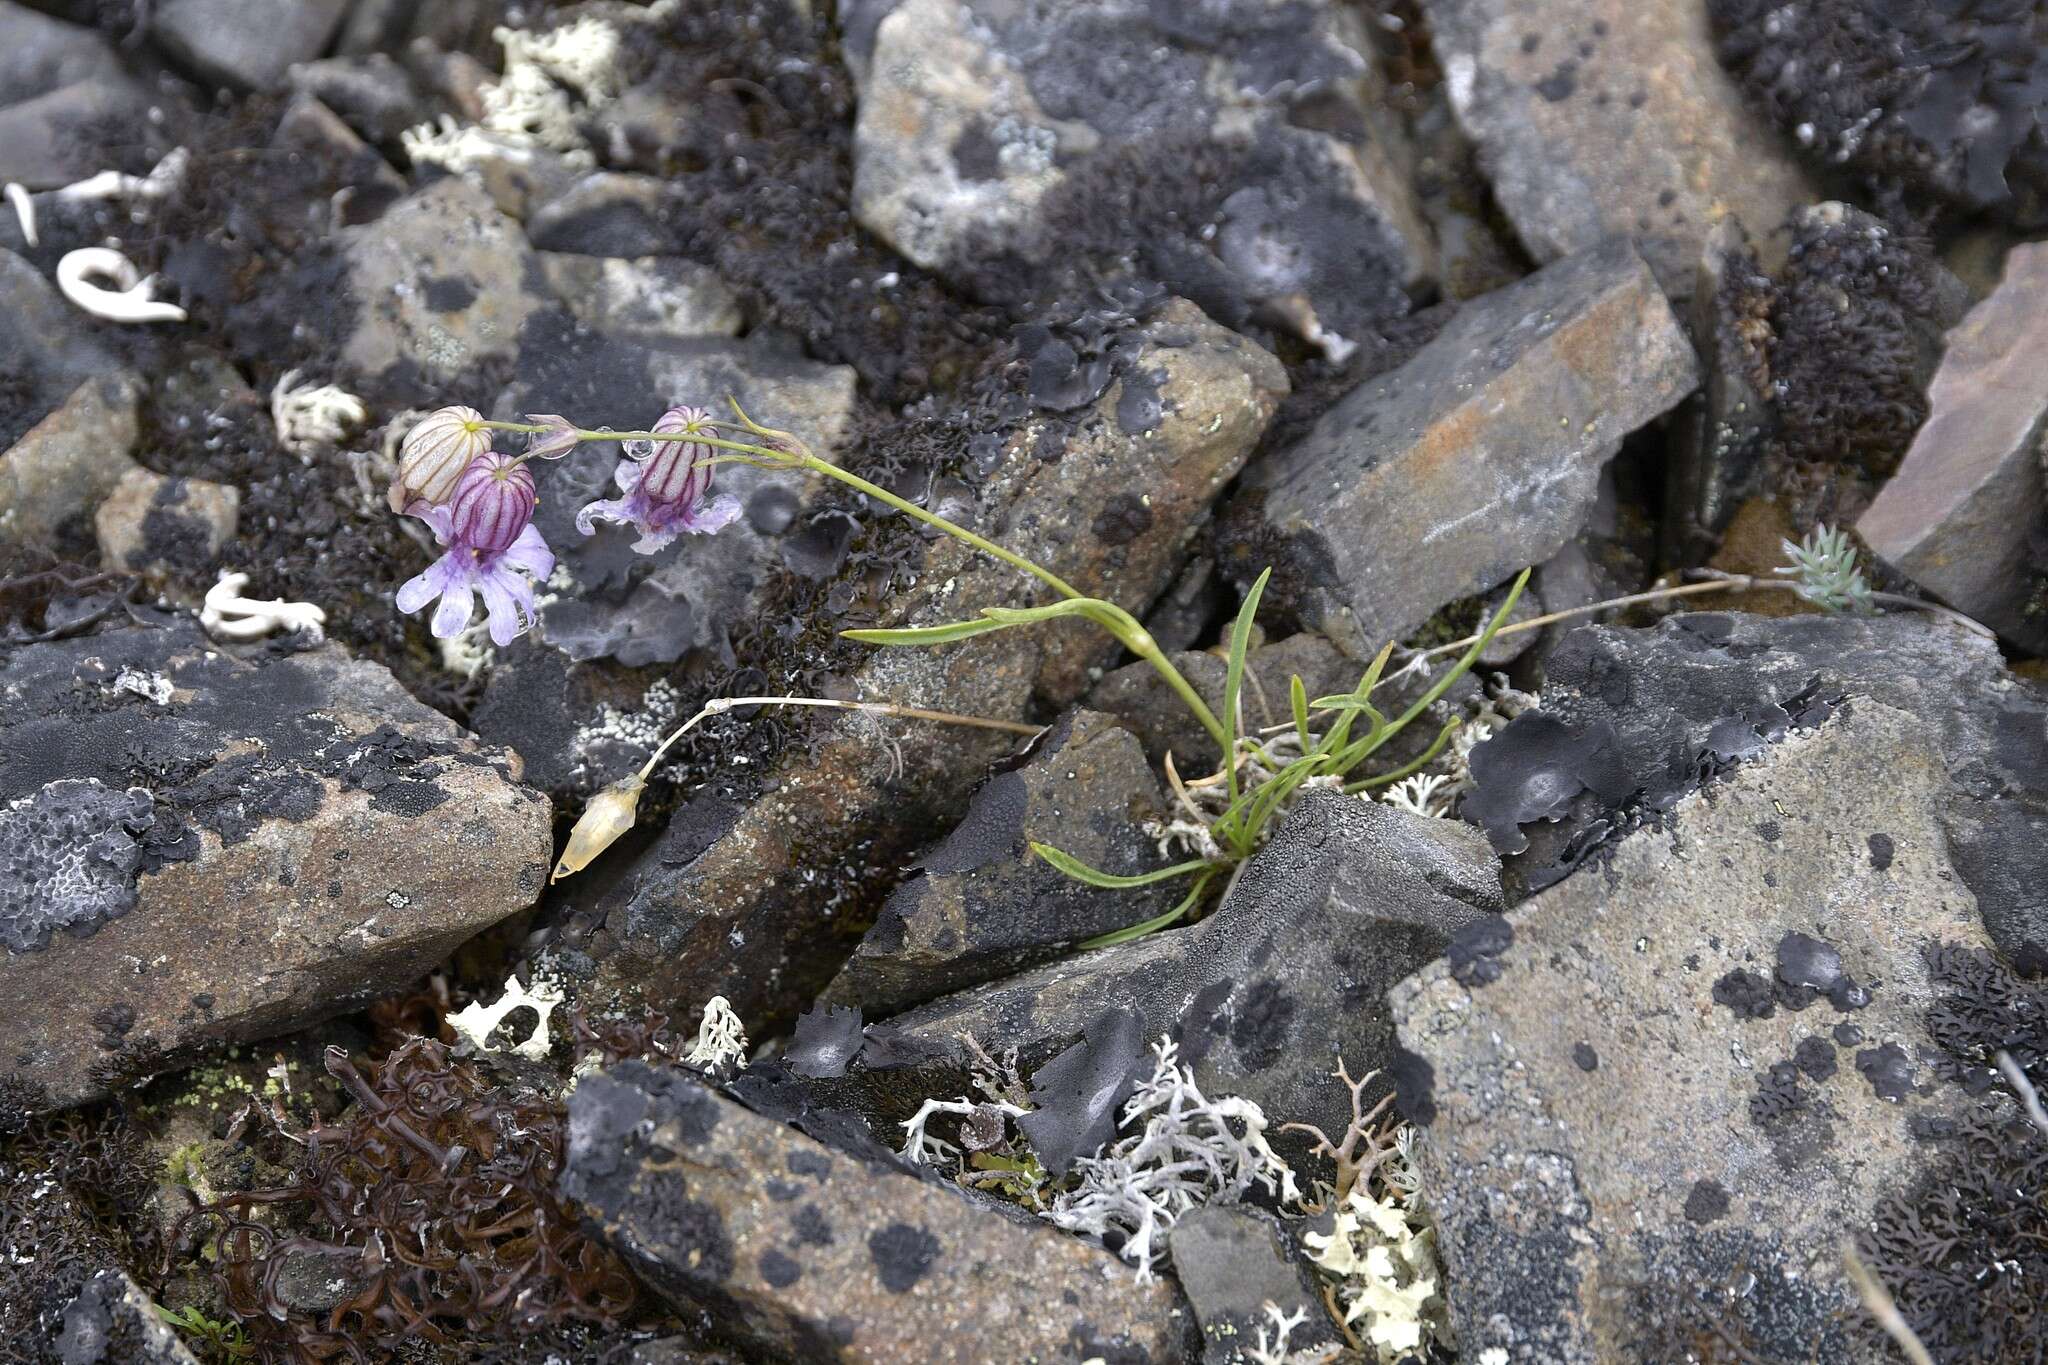 Image of narrow-leafed campion